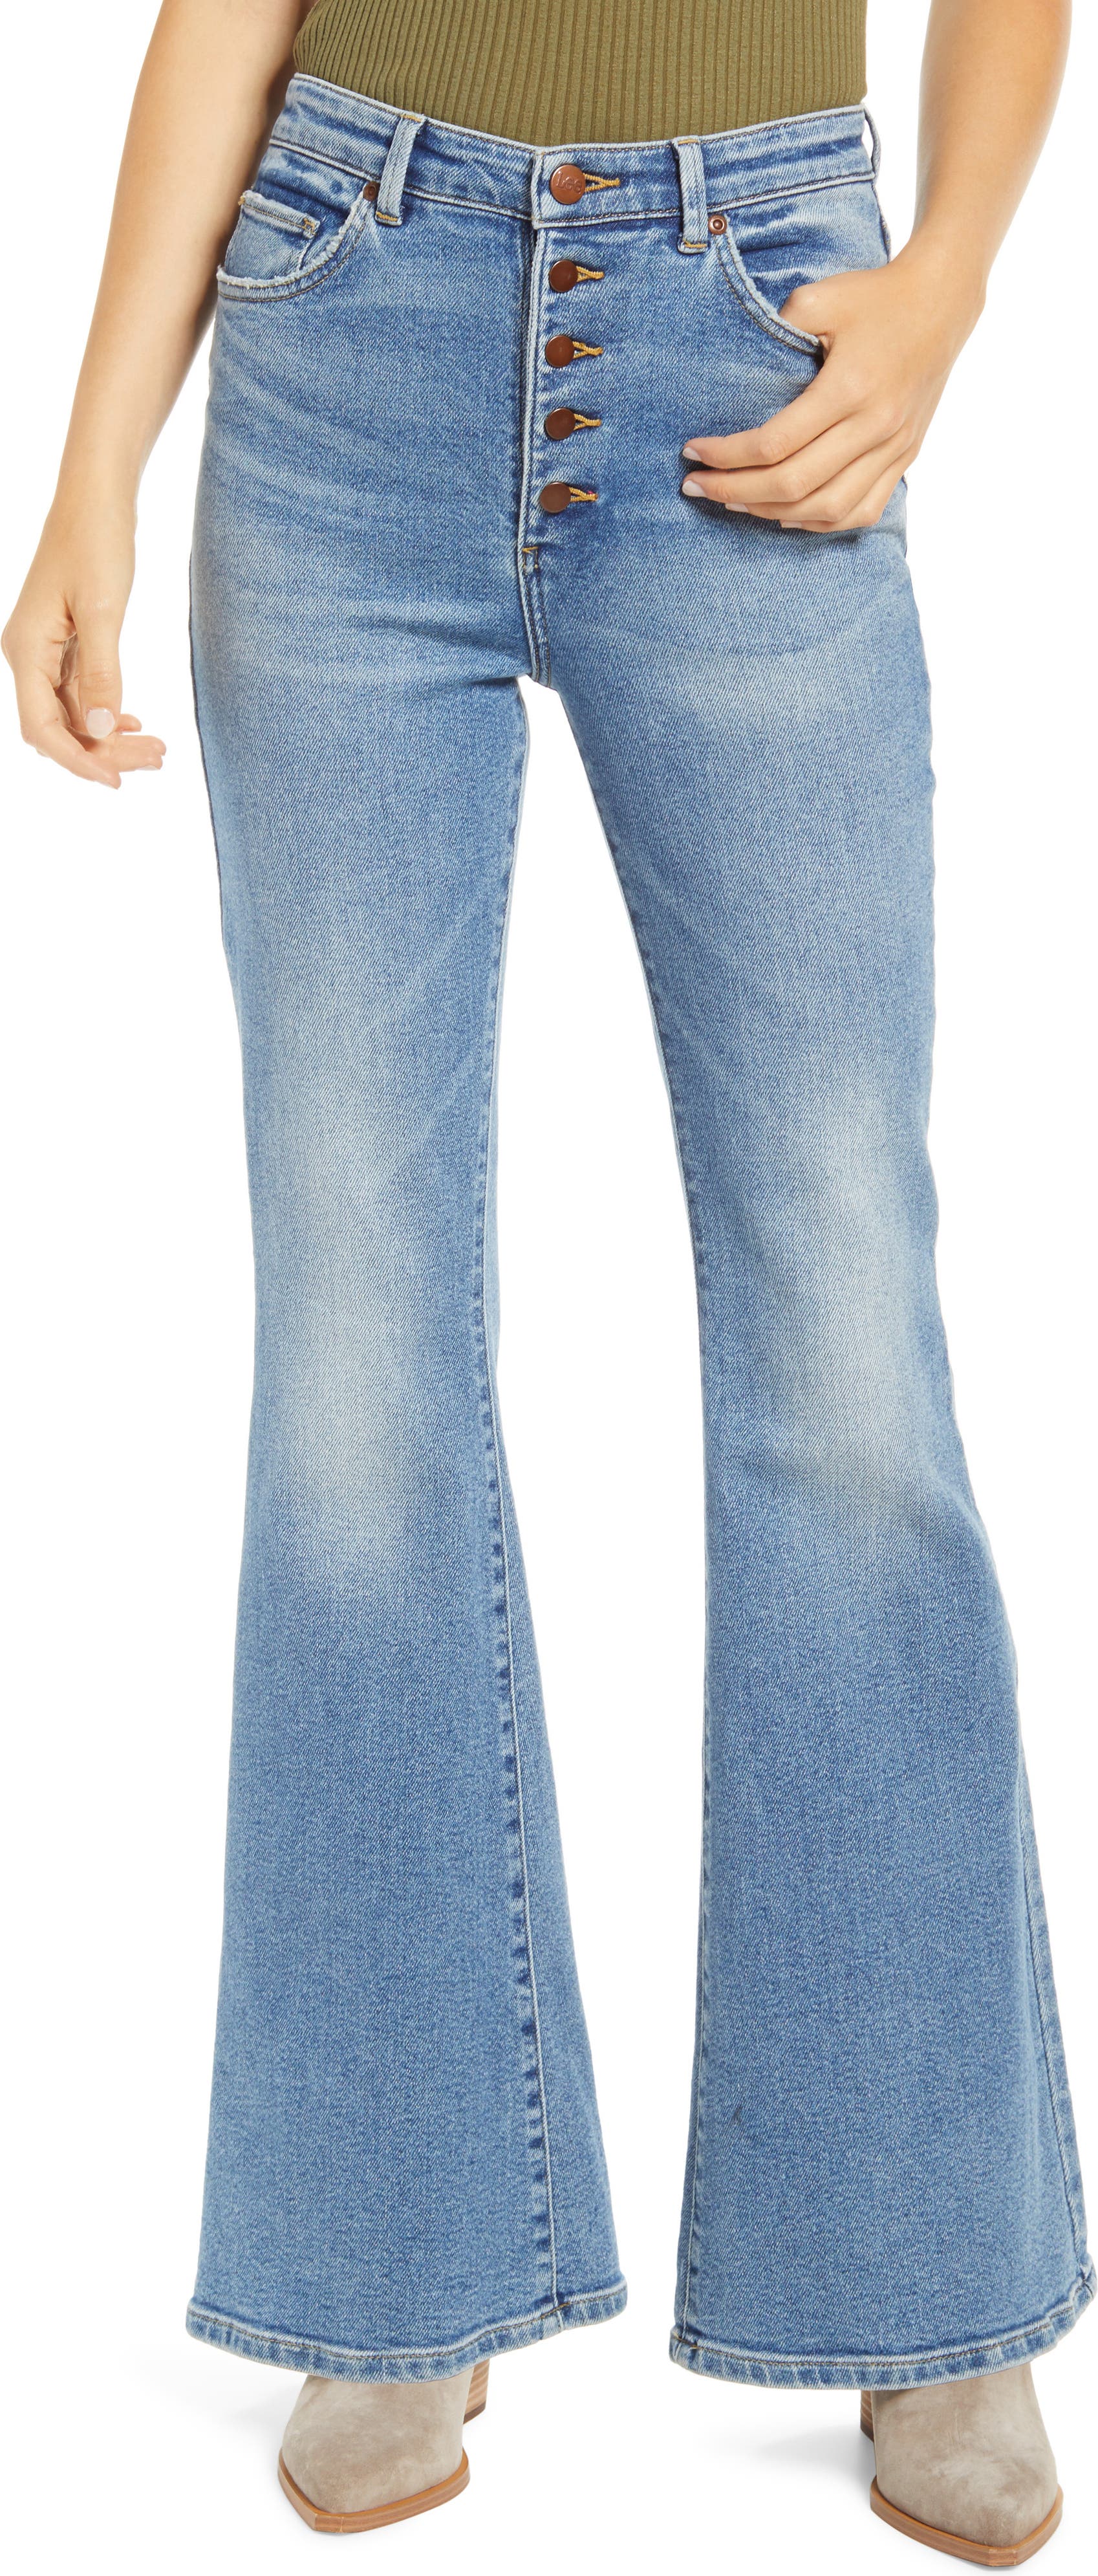 STYLE & CO Dark Wash Denim Flare Jeans CHOOSE YOUR SIZE High-Rise